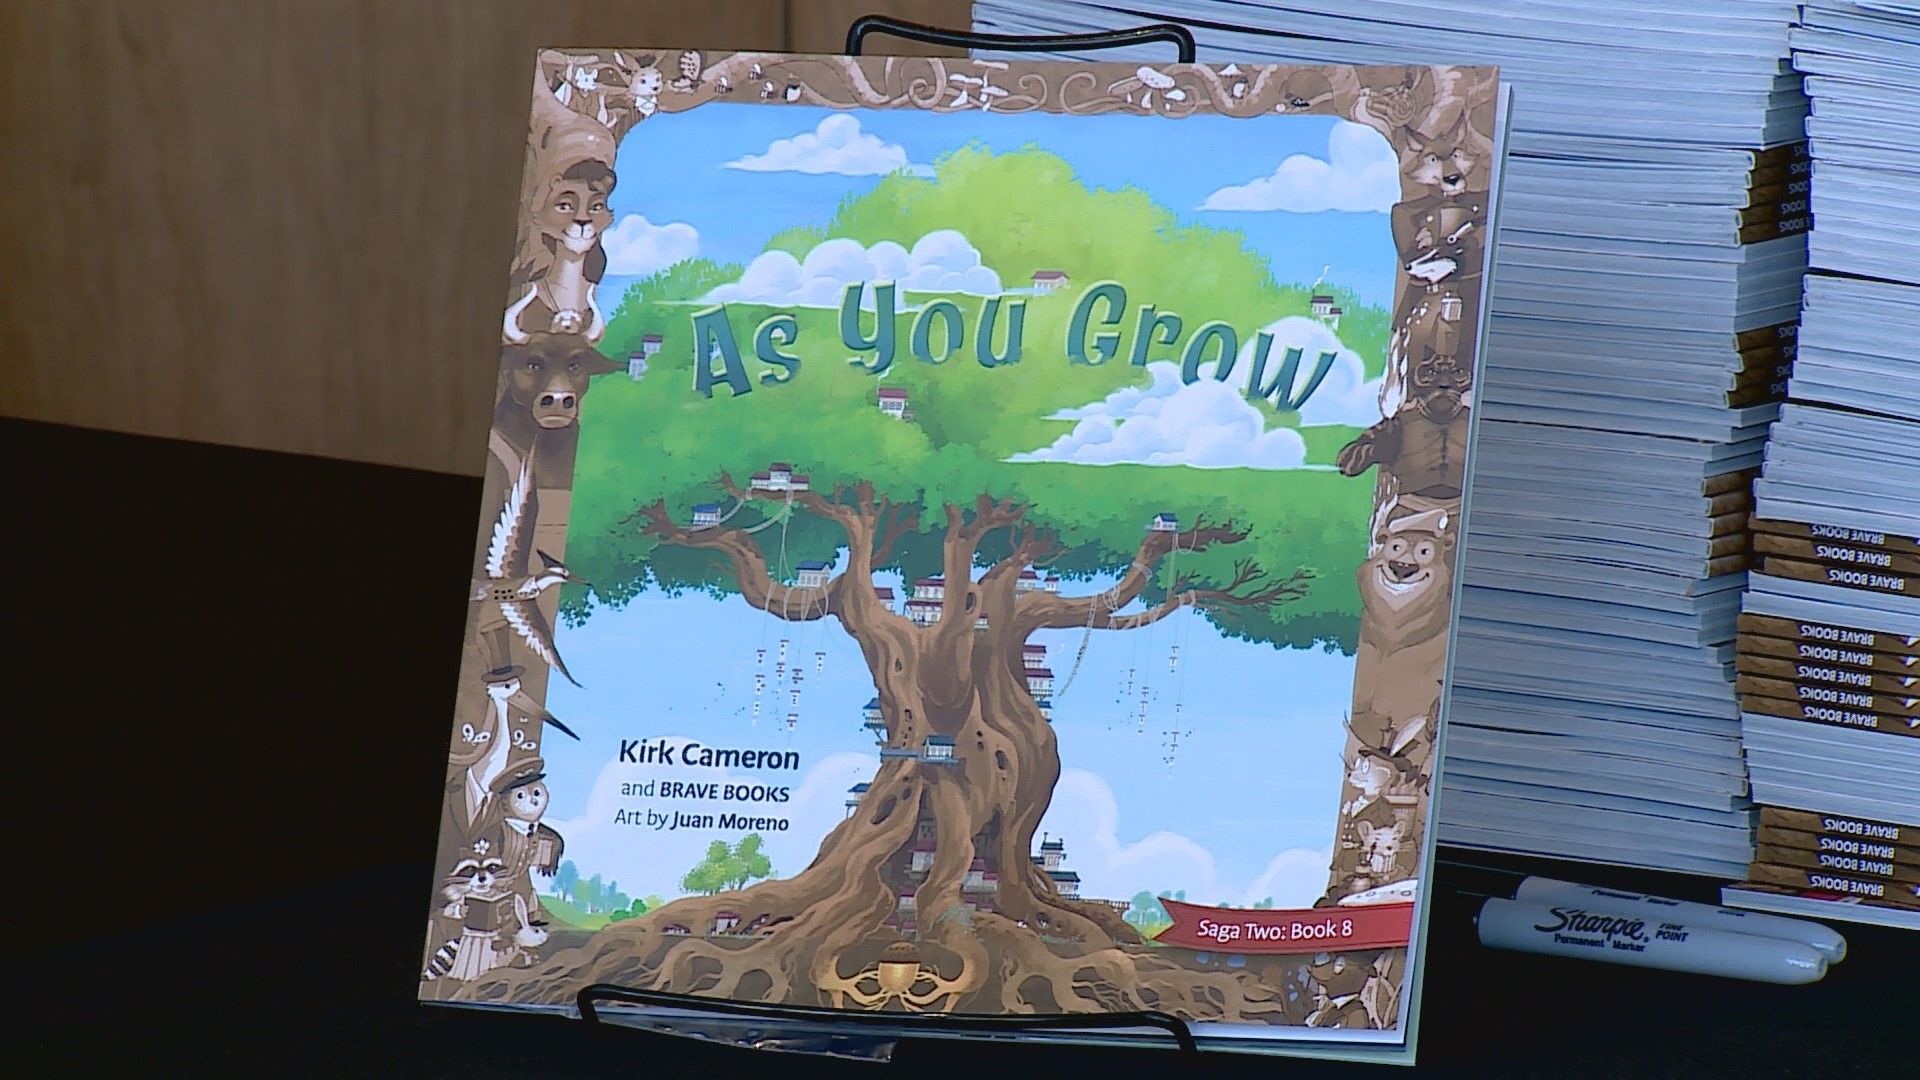 Kirk Cameron's library reading of his children's book ‘As You Grow’ saw some resistance from members of the community